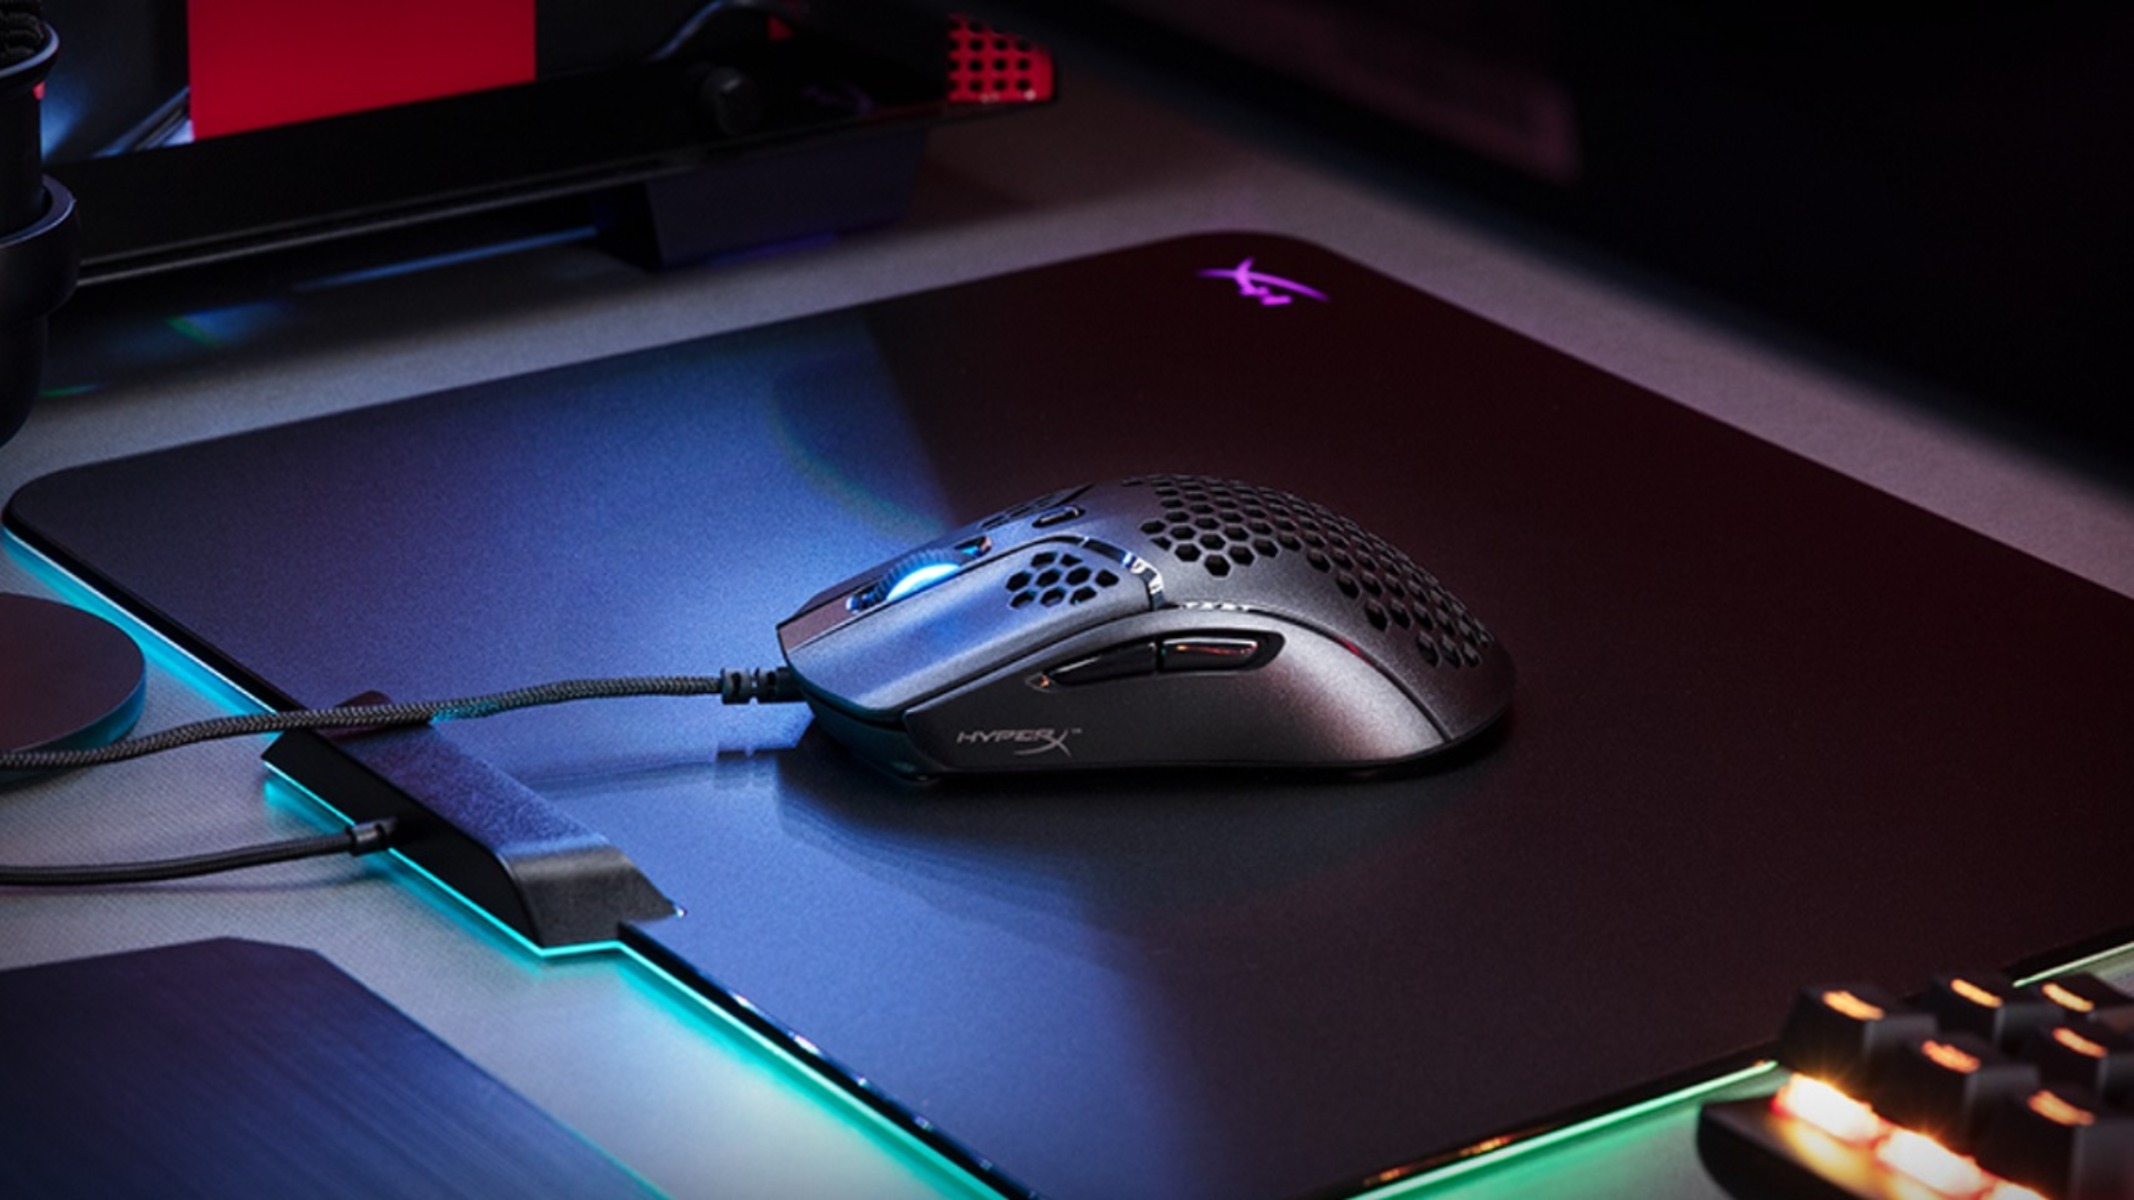 What Is The Fire Click On Gaming Mouse?